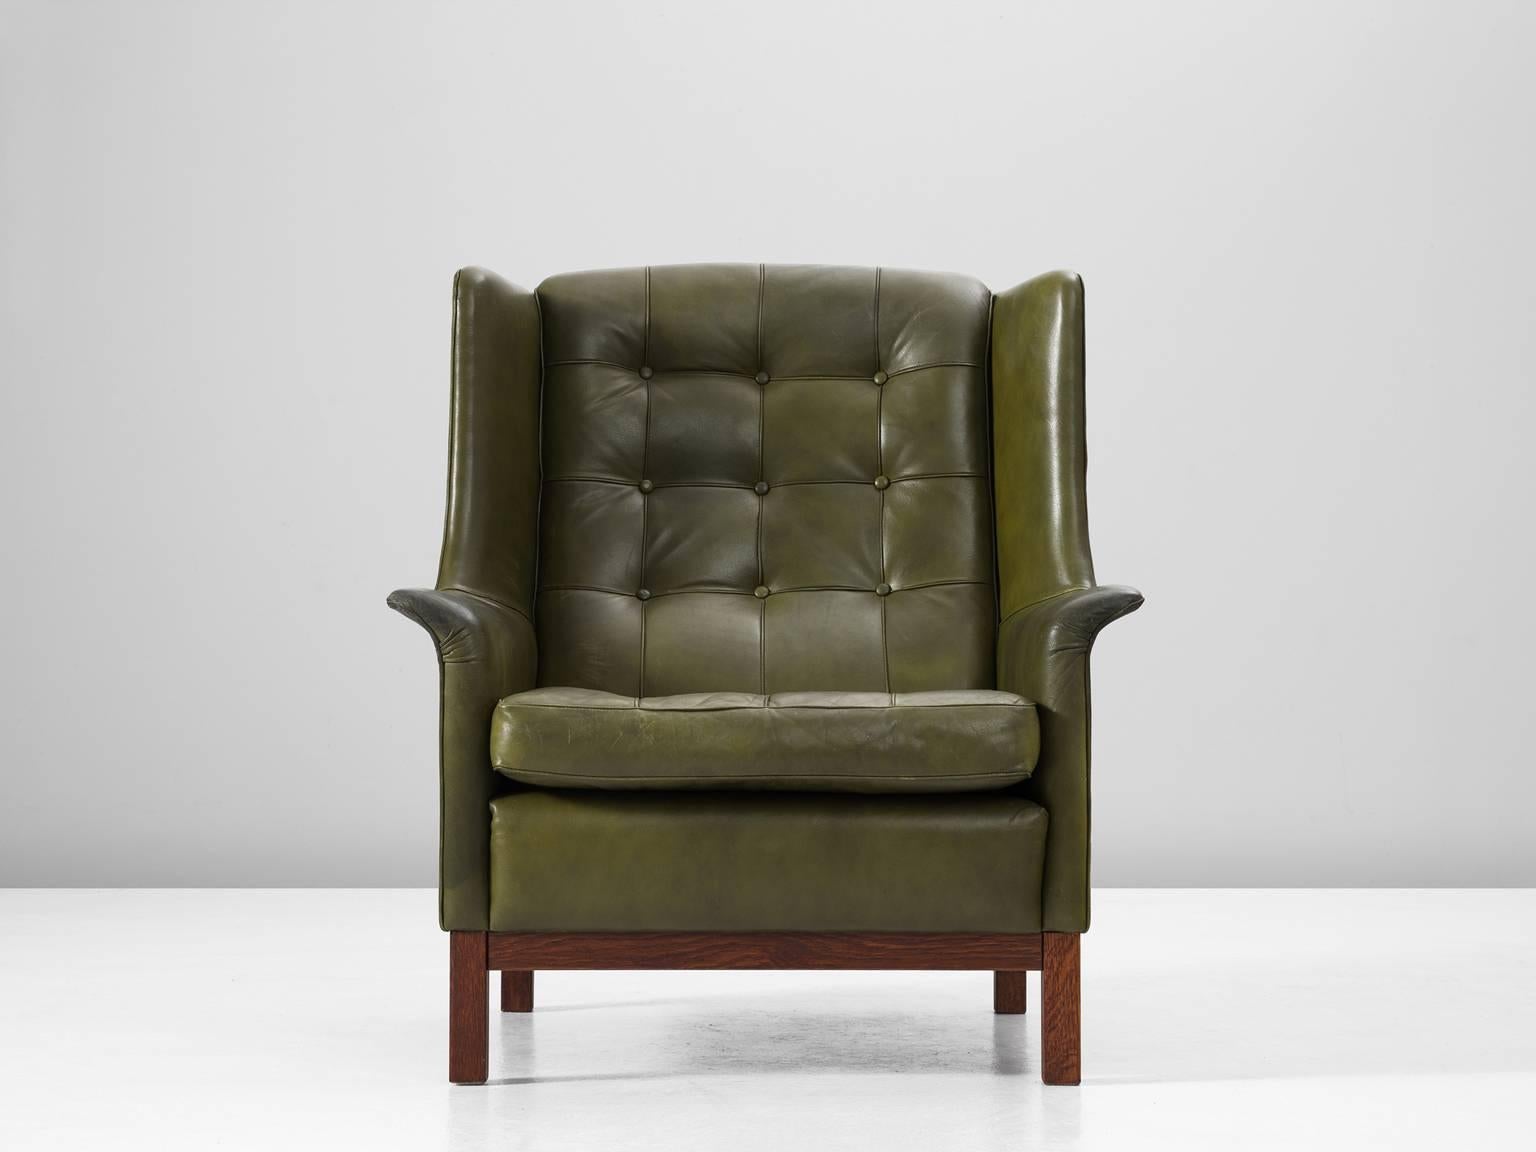 High back chair, in leather and wood by Arne Norell, Sweden, 1960s.

Wonderful comfortable green buffalo leather easy chair by Swedish designer Arne Norell. This lounge chair comes with a very high standard of comfort, as where Norell is known for.